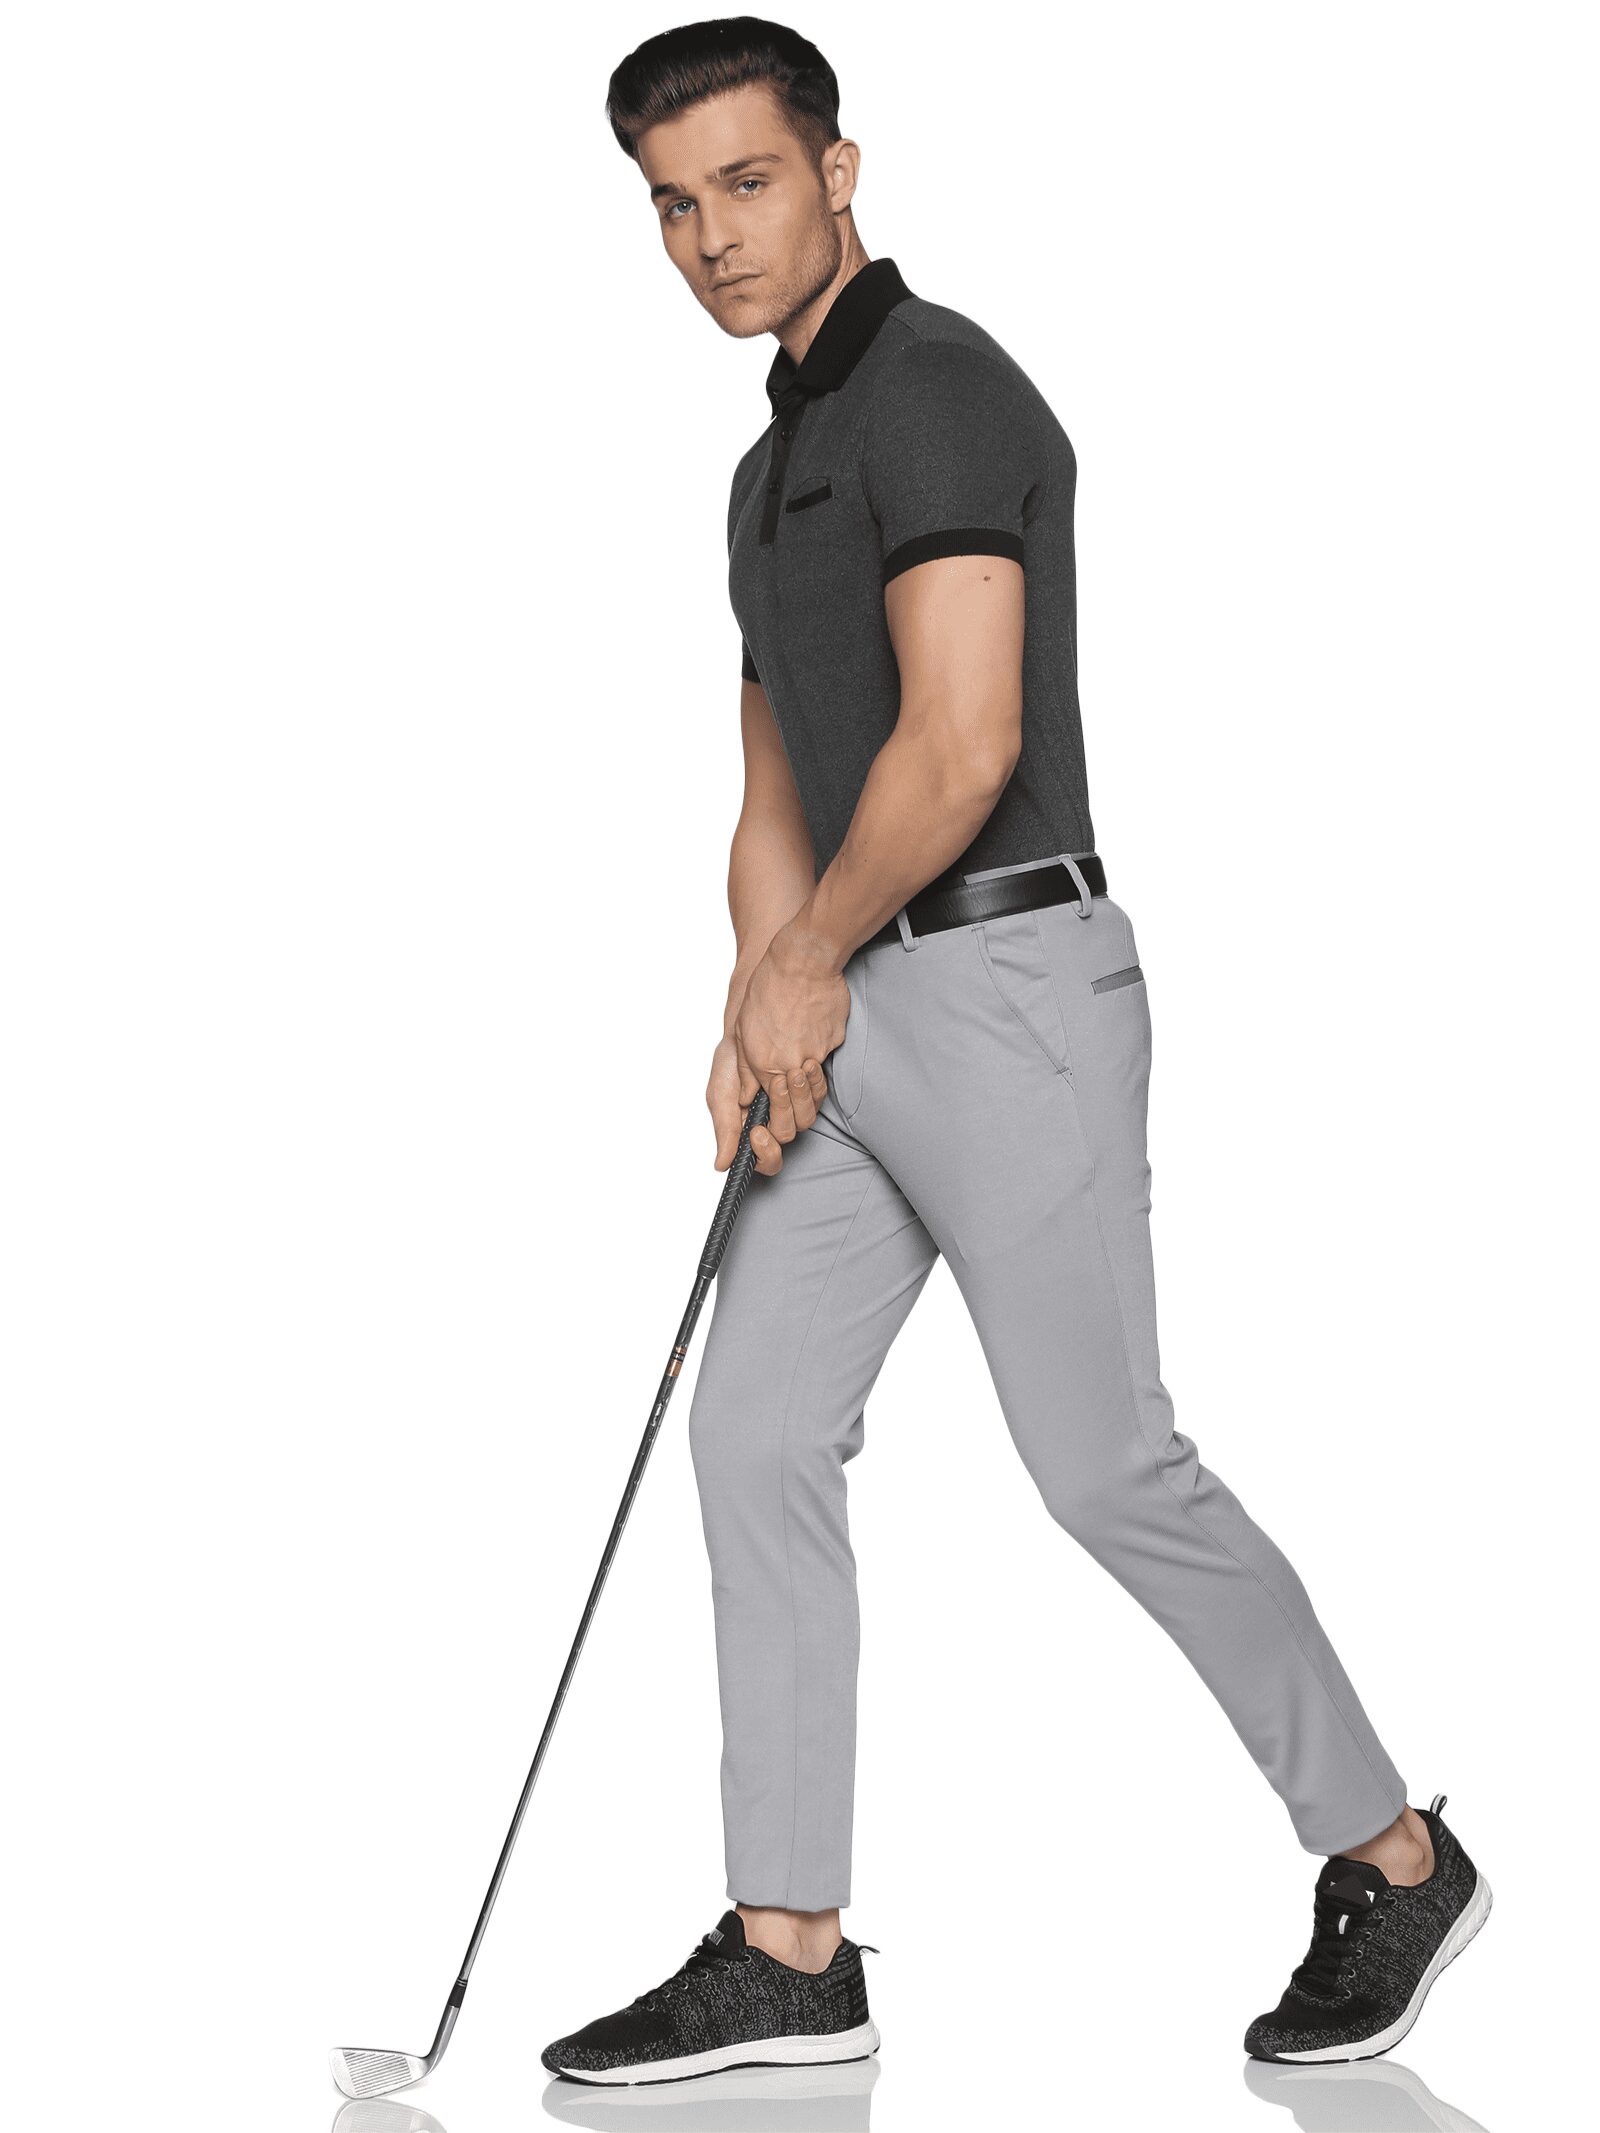 Buy Inesis 8516695 Mens Golf Trousers UK39 FR48 L34 Blue Online at  Low Prices in India  Amazonin